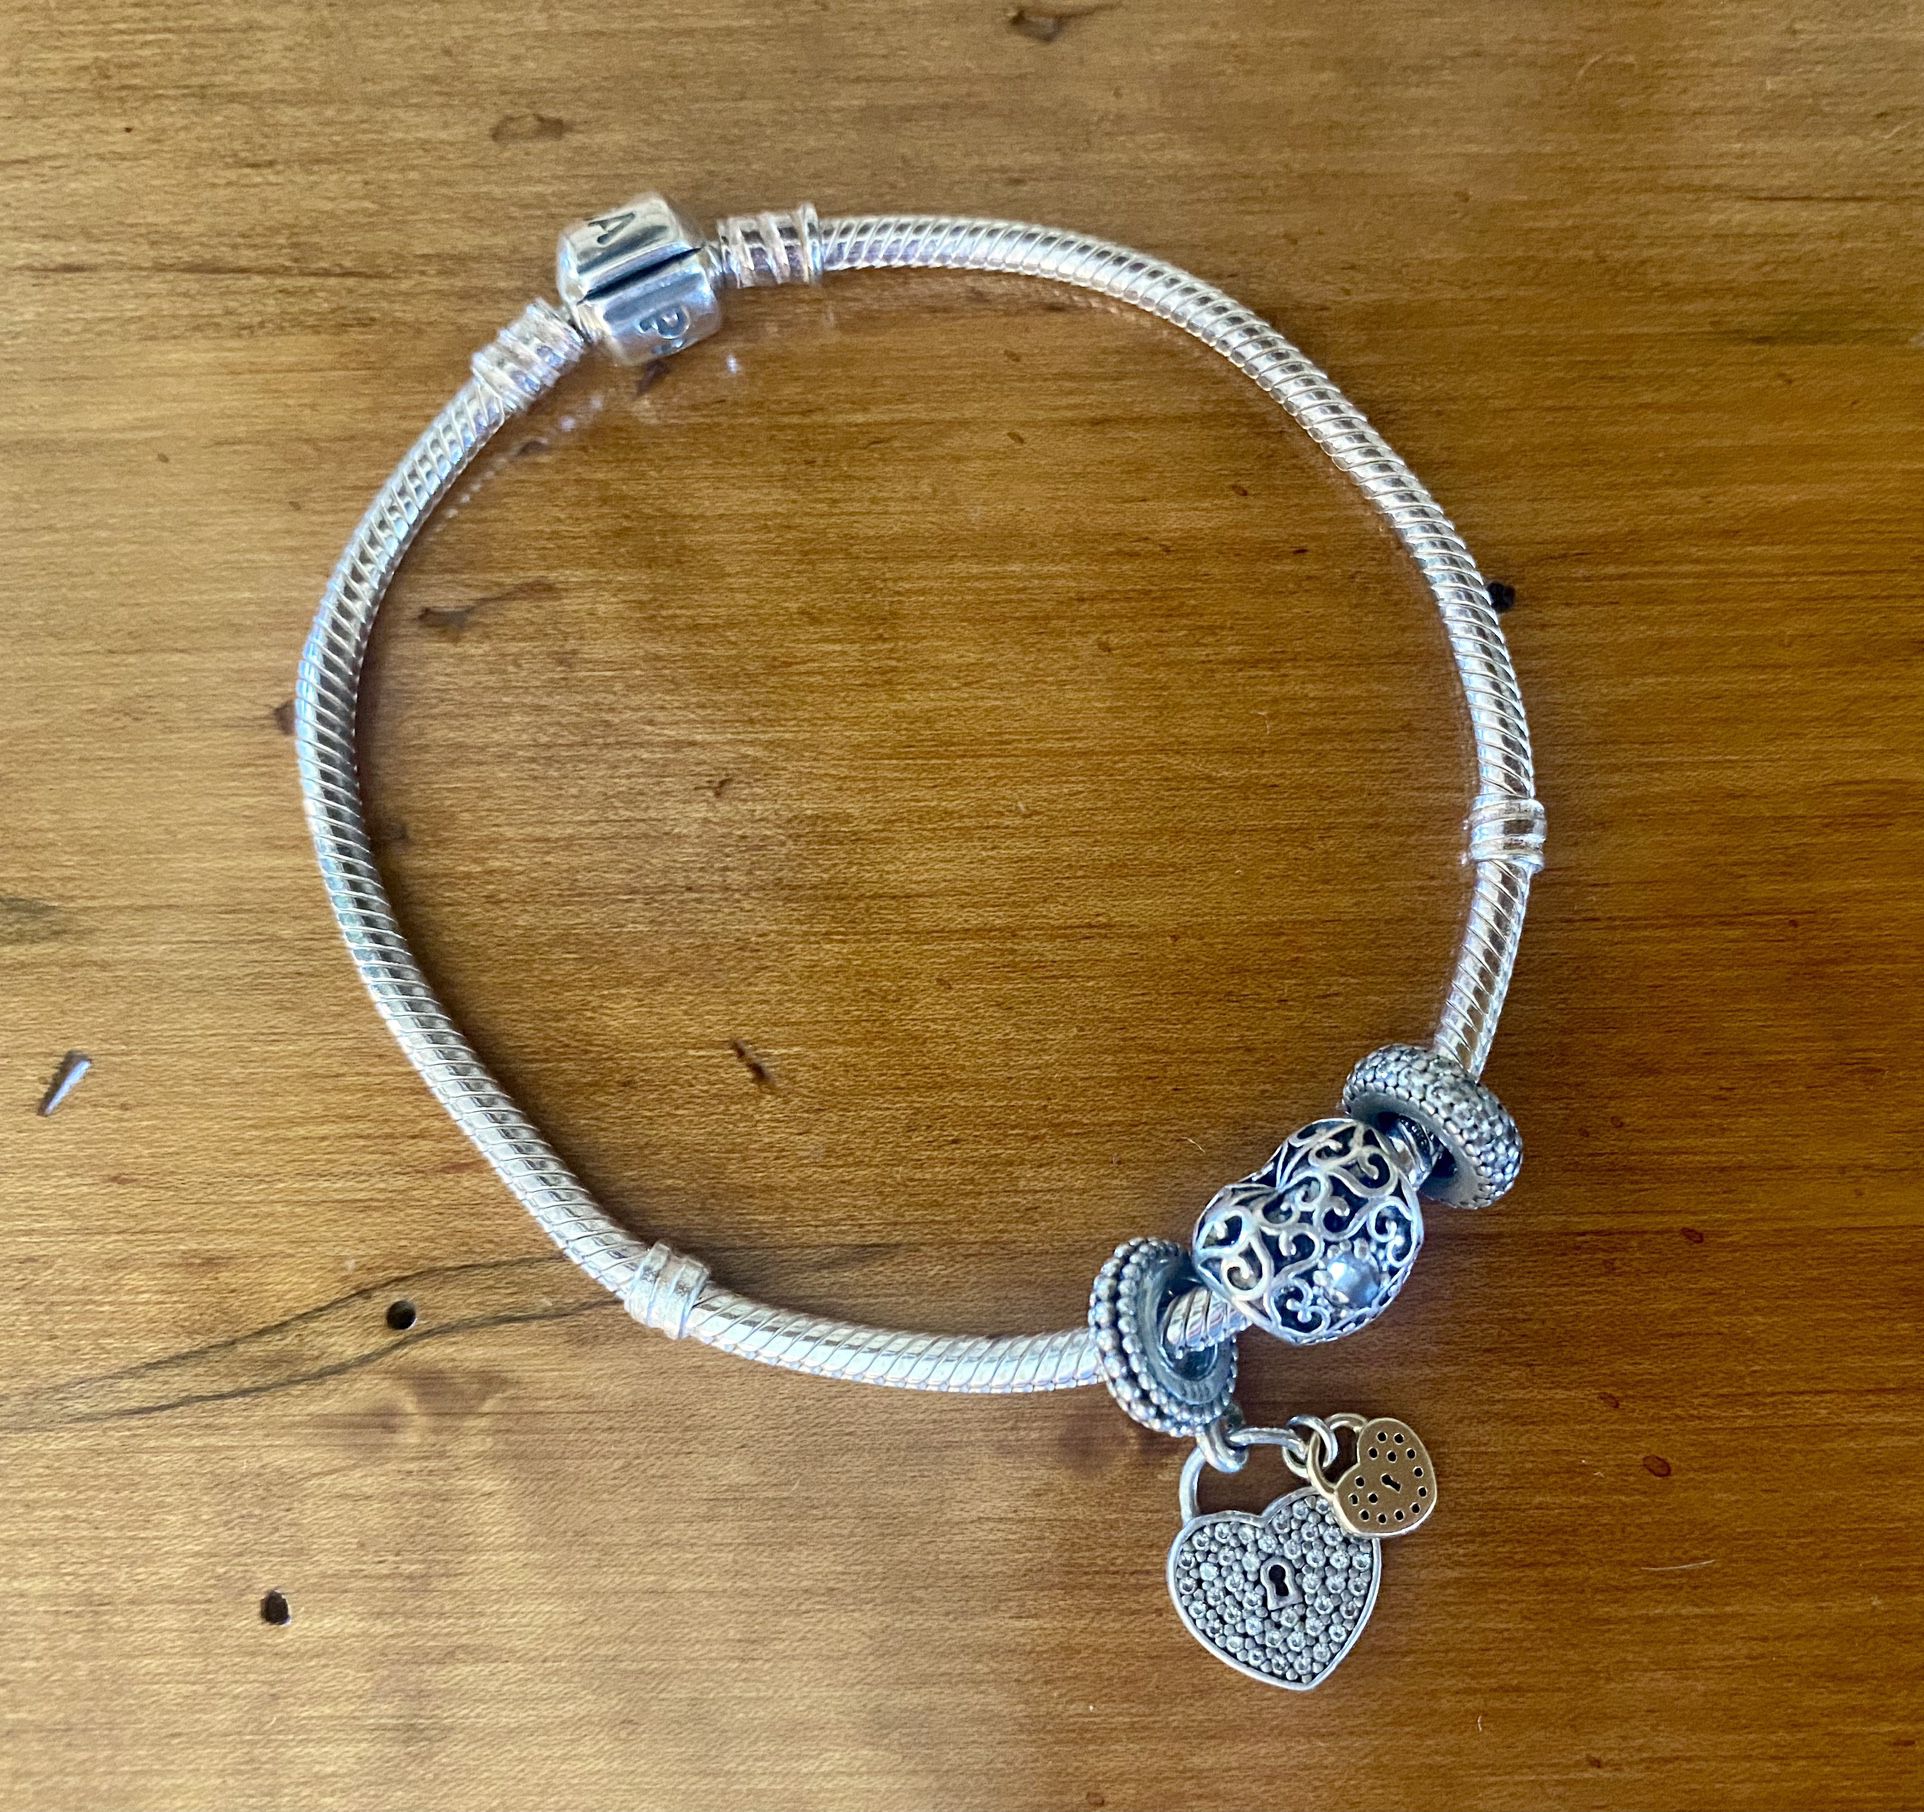 Pandora sterling silver snake bracelet with three charms